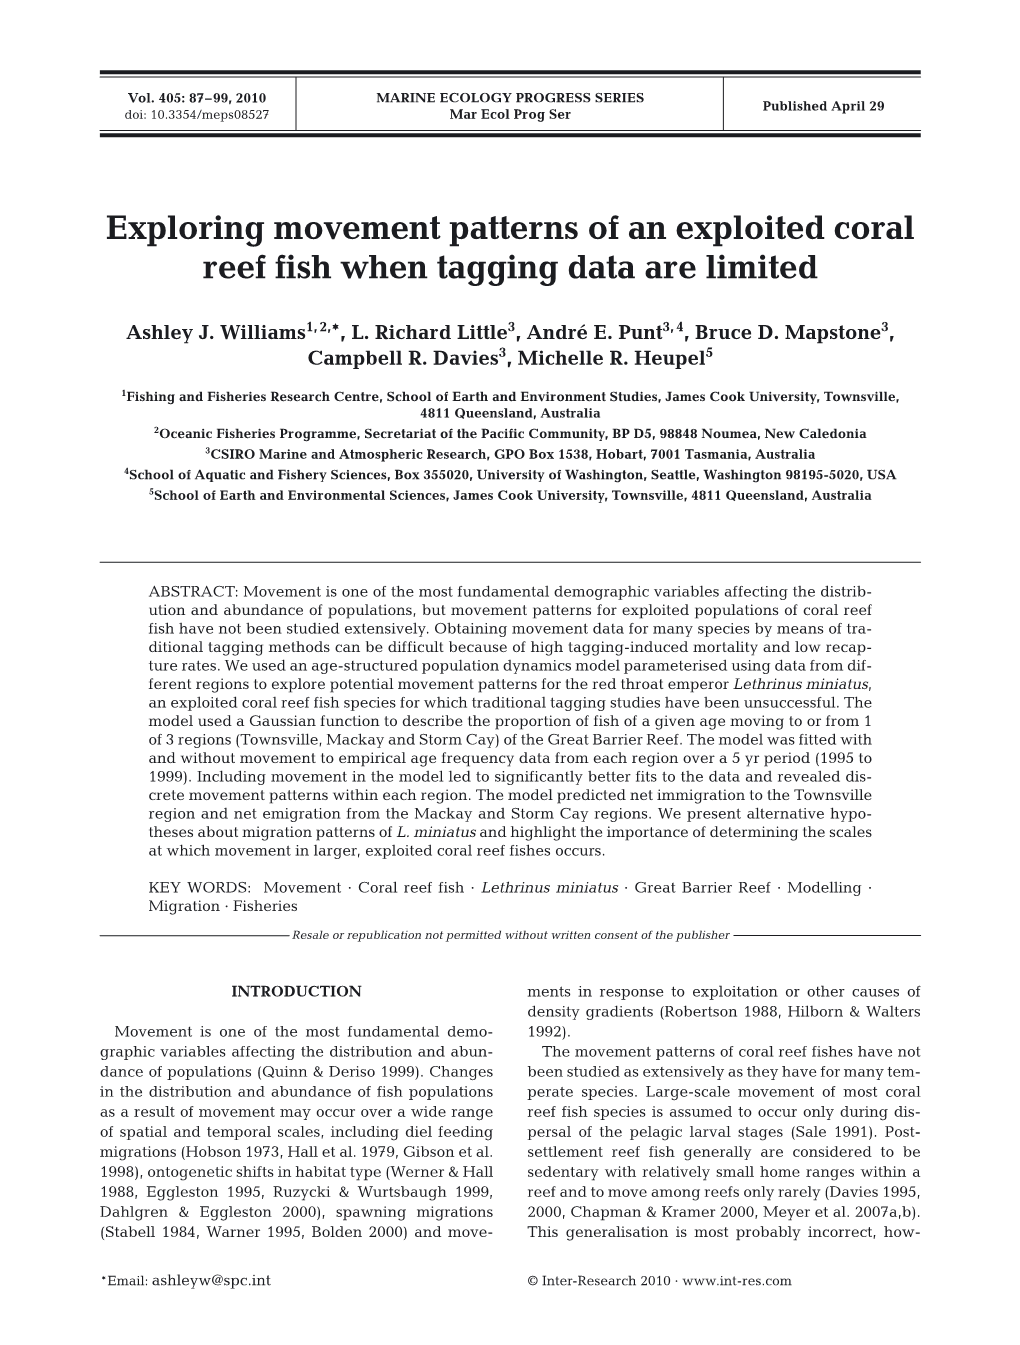 Exploring Movement Patterns of an Exploited Coral Reef Fish When Tagging Data Are Limited